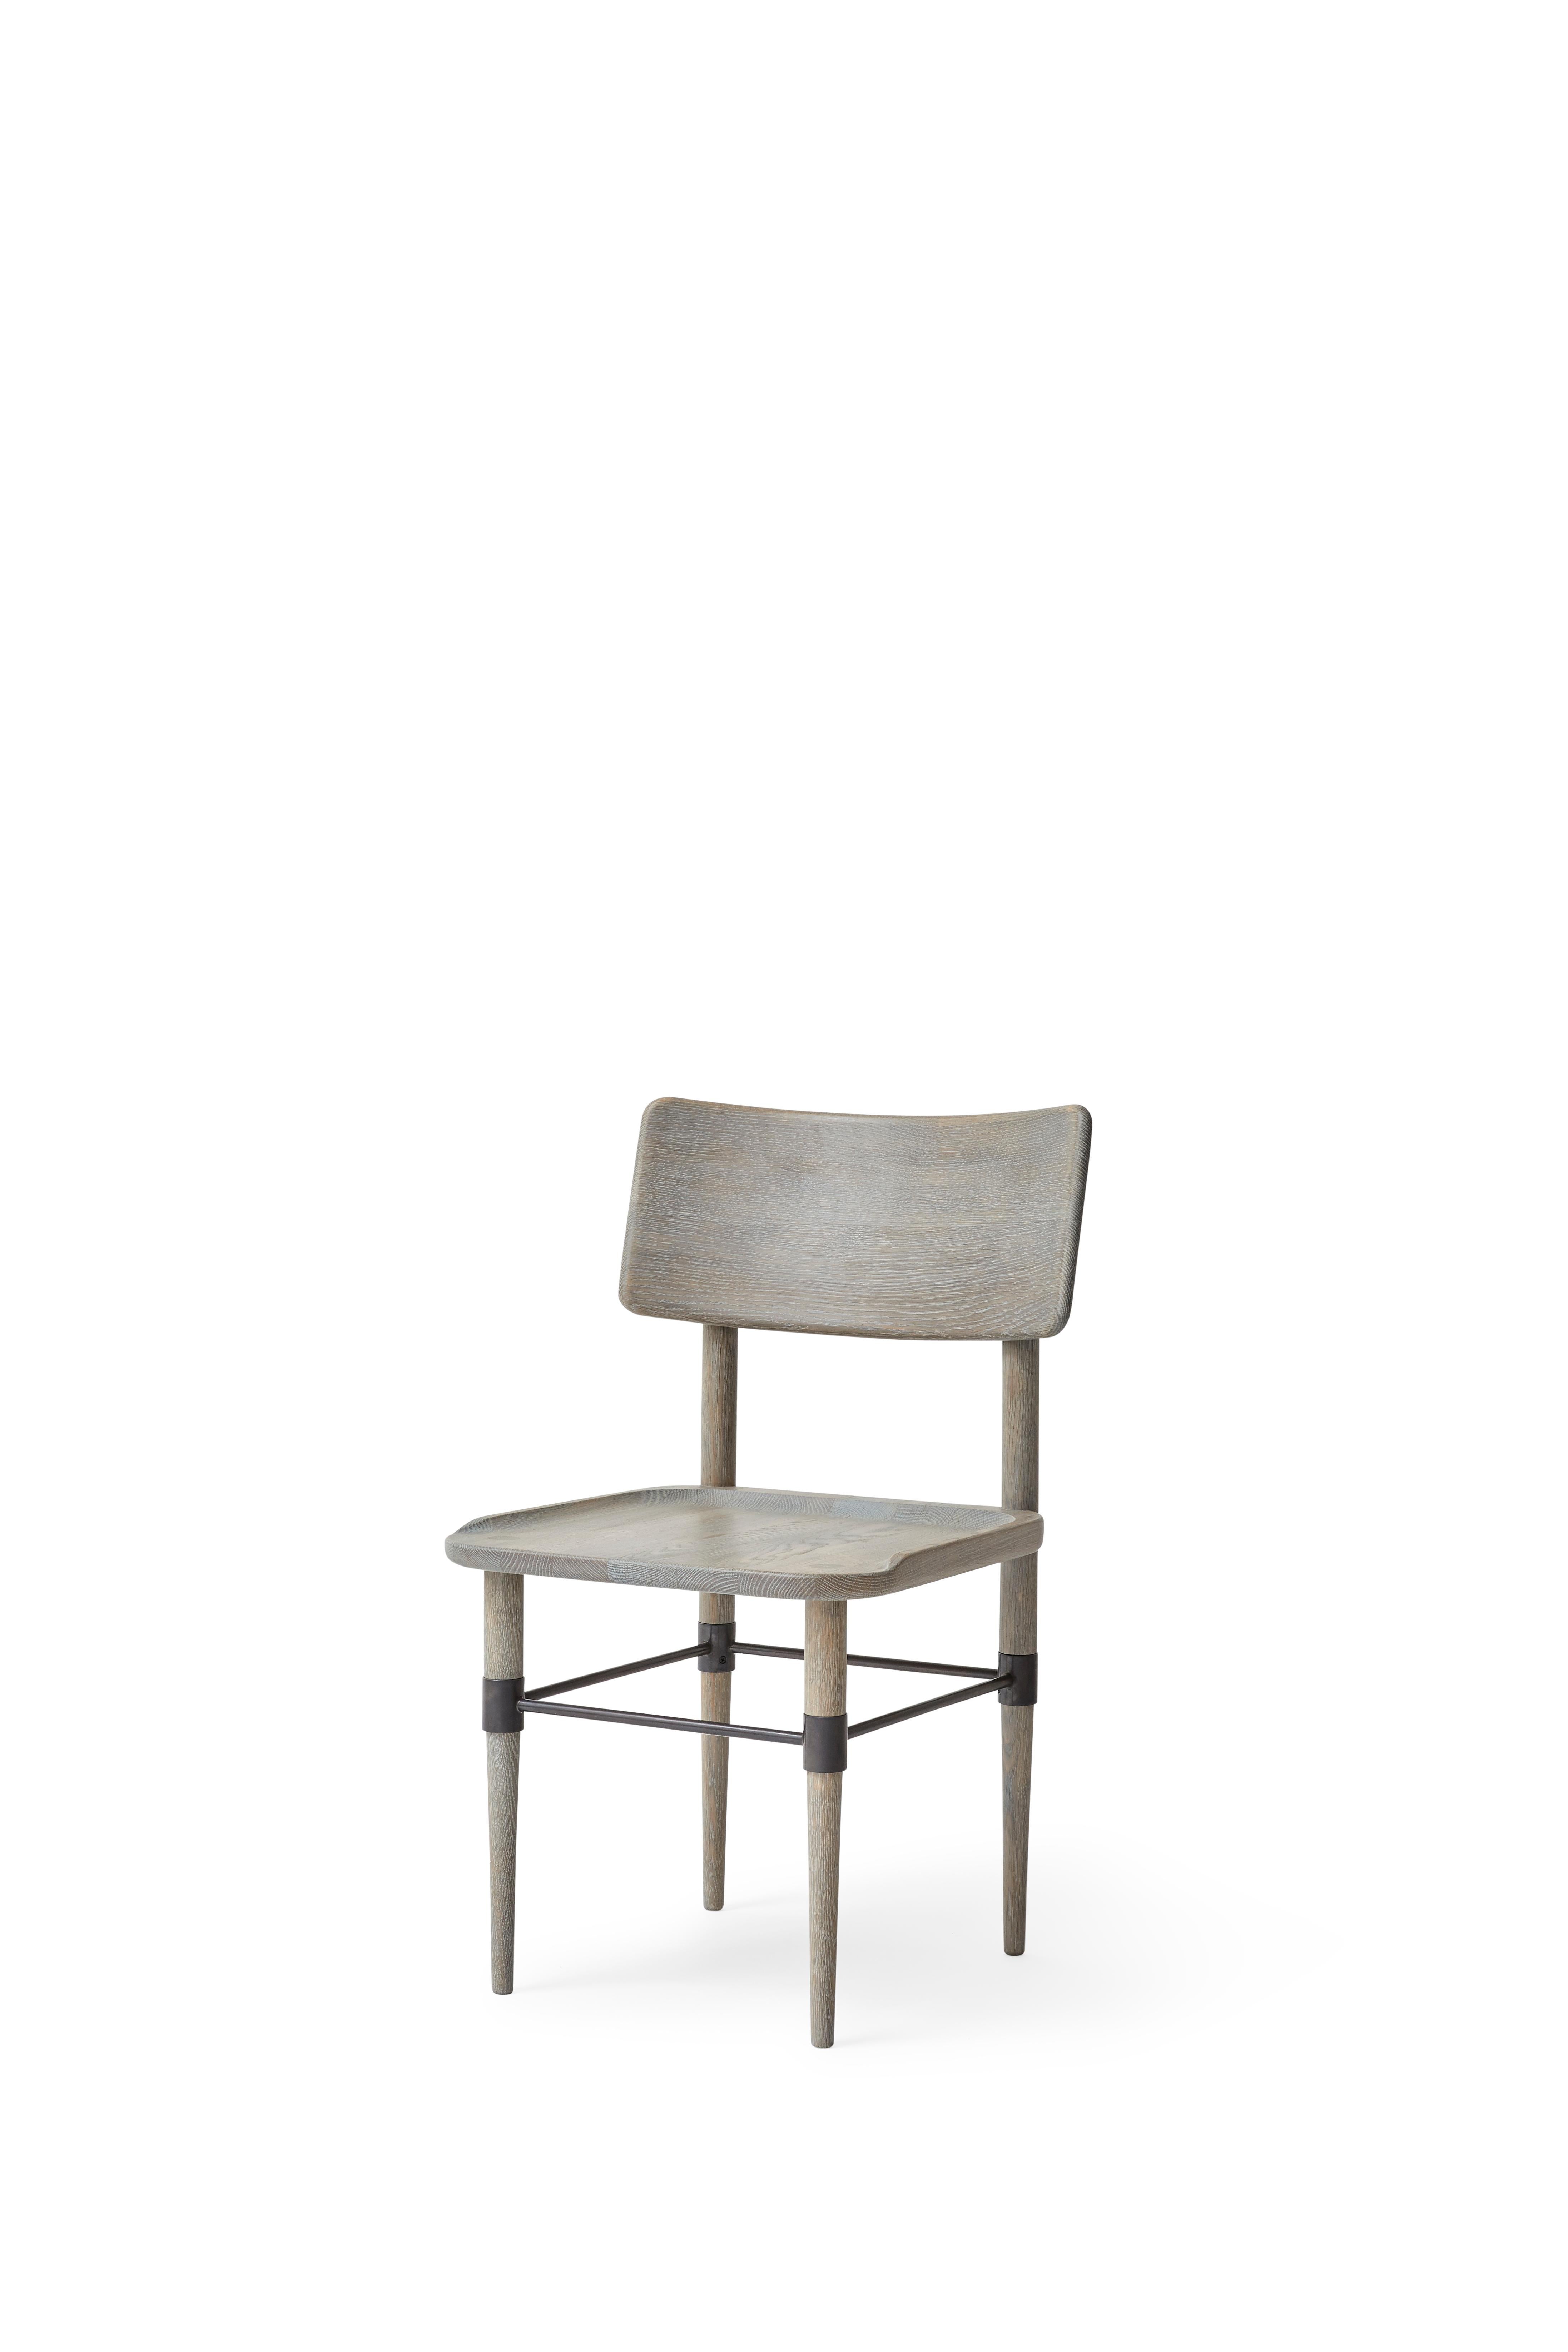 MG101 Dining chair in Grey Nature oak and blackened metal. The seat pad is not included and can be ordered separately.

The Holmen series originates in a series of furniture, which was developed for Michelin restaurant 108 in Copenhagen. The common